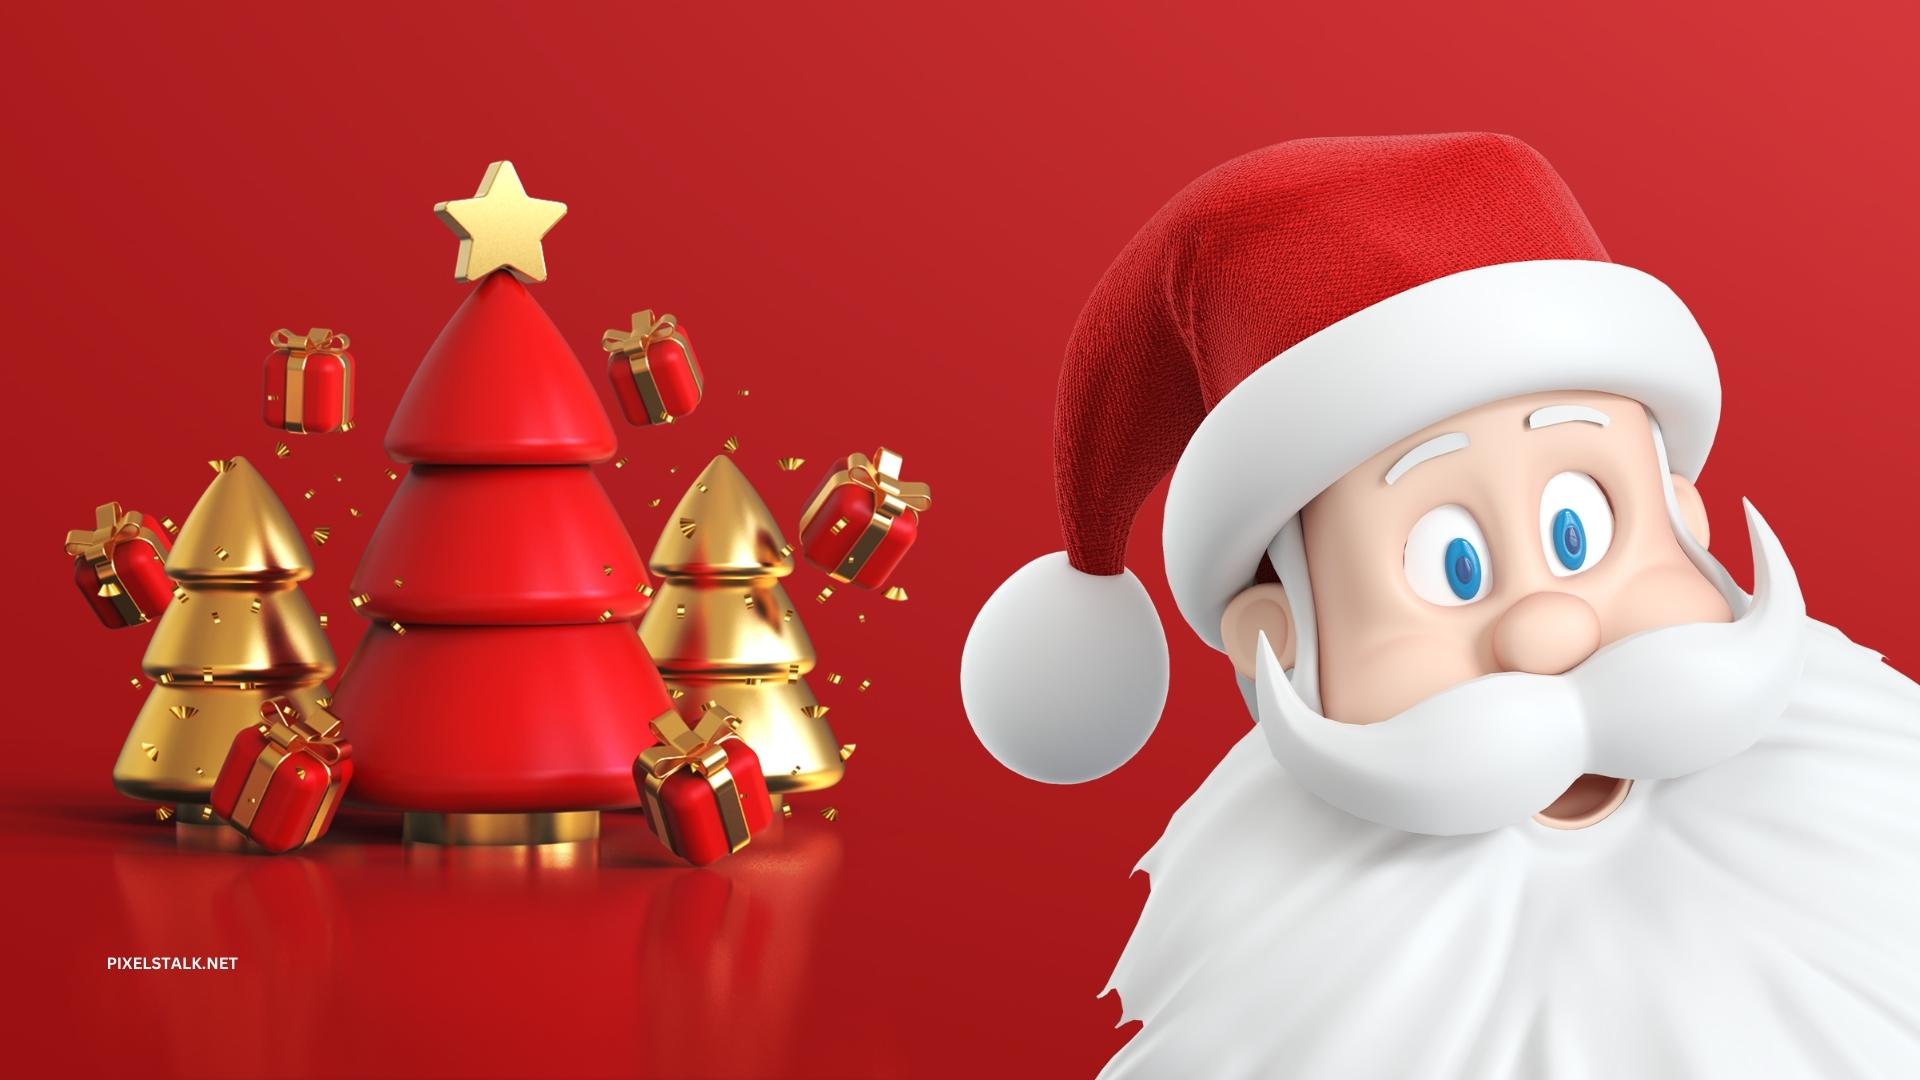 Merry Christmas 2022 Wallpapers HD 